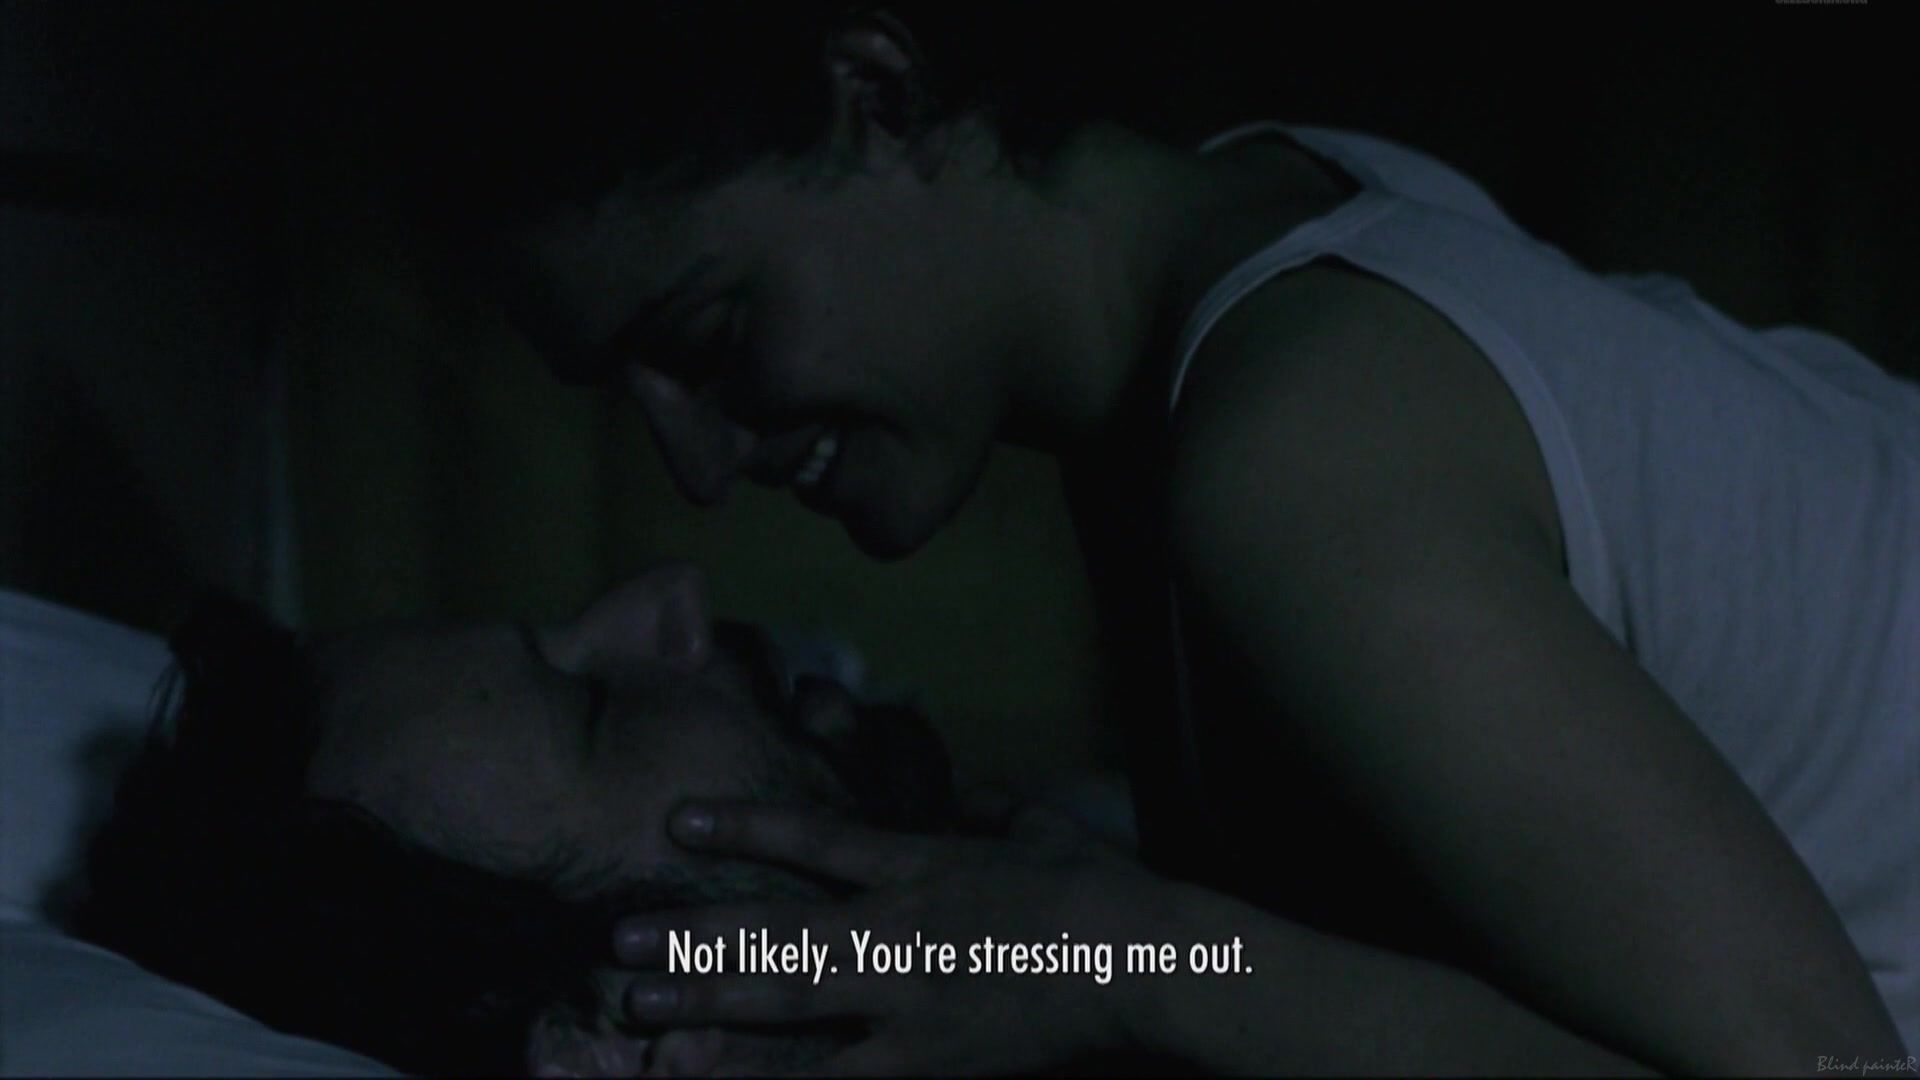 ShesFreaky Full Frontal Ariane Labed - Attenberg (2010) Boo.by